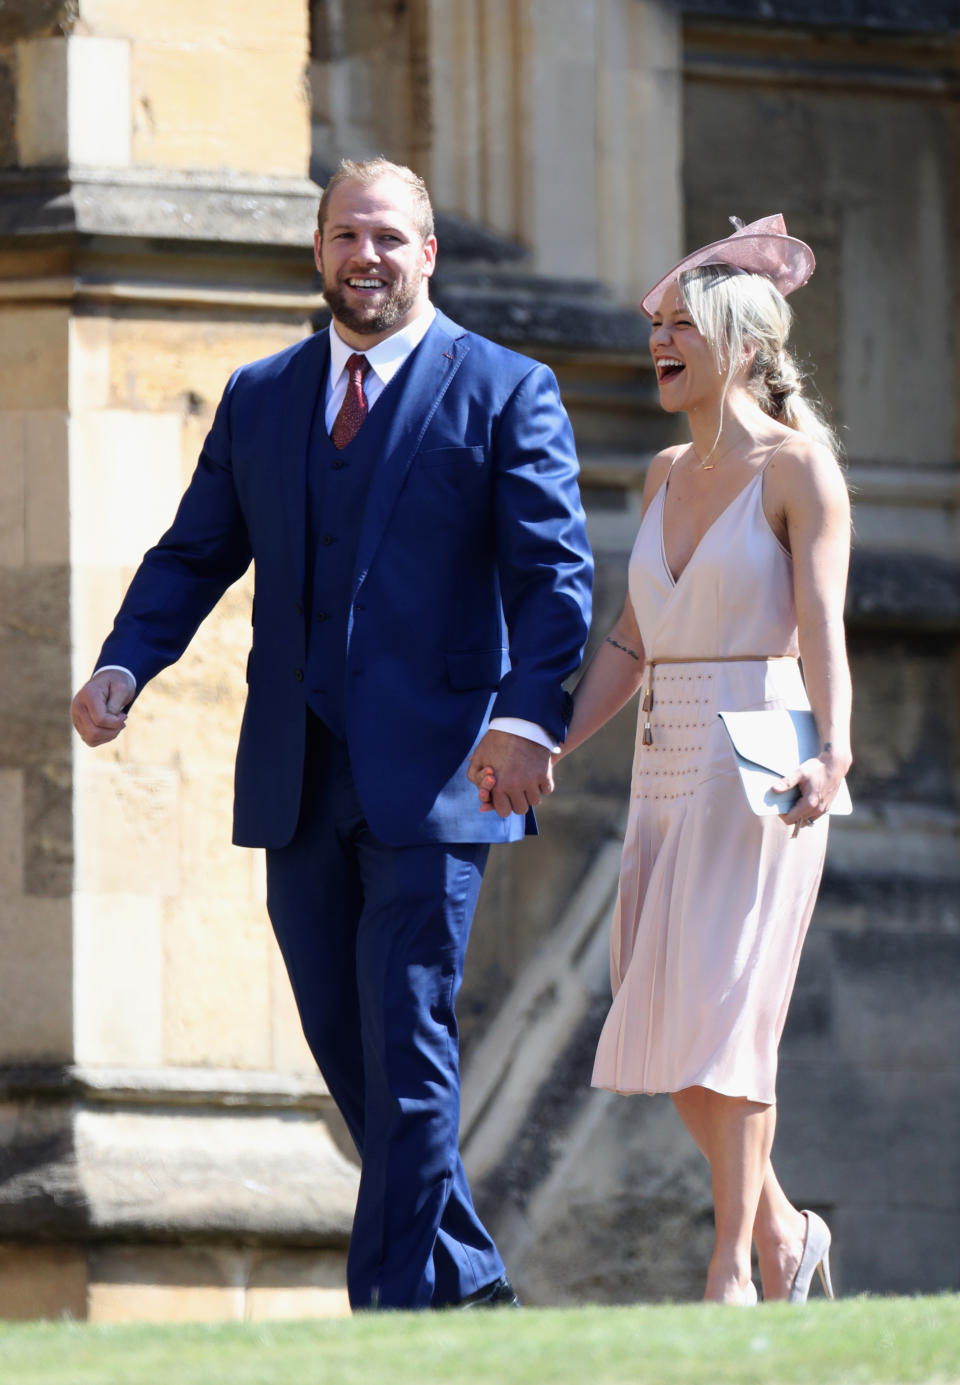 WINDSOR, ENGLAND - MAY 19:  James Haskell and Chloe Madeley attend the wedding of Prince Harry to Ms Meghan Markle at St George's Chapel, Windsor Castle on May 19, 2018 in Windsor, England. Prince Henry Charles Albert David of Wales marries Ms. Meghan Markle in a service at St George's Chapel inside the grounds of Windsor Castle. Among the guests were 2200 members of the public, the royal family and Ms. Markle's Mother Doria Ragland.  (Photo by Chris Jackson/Getty Images)